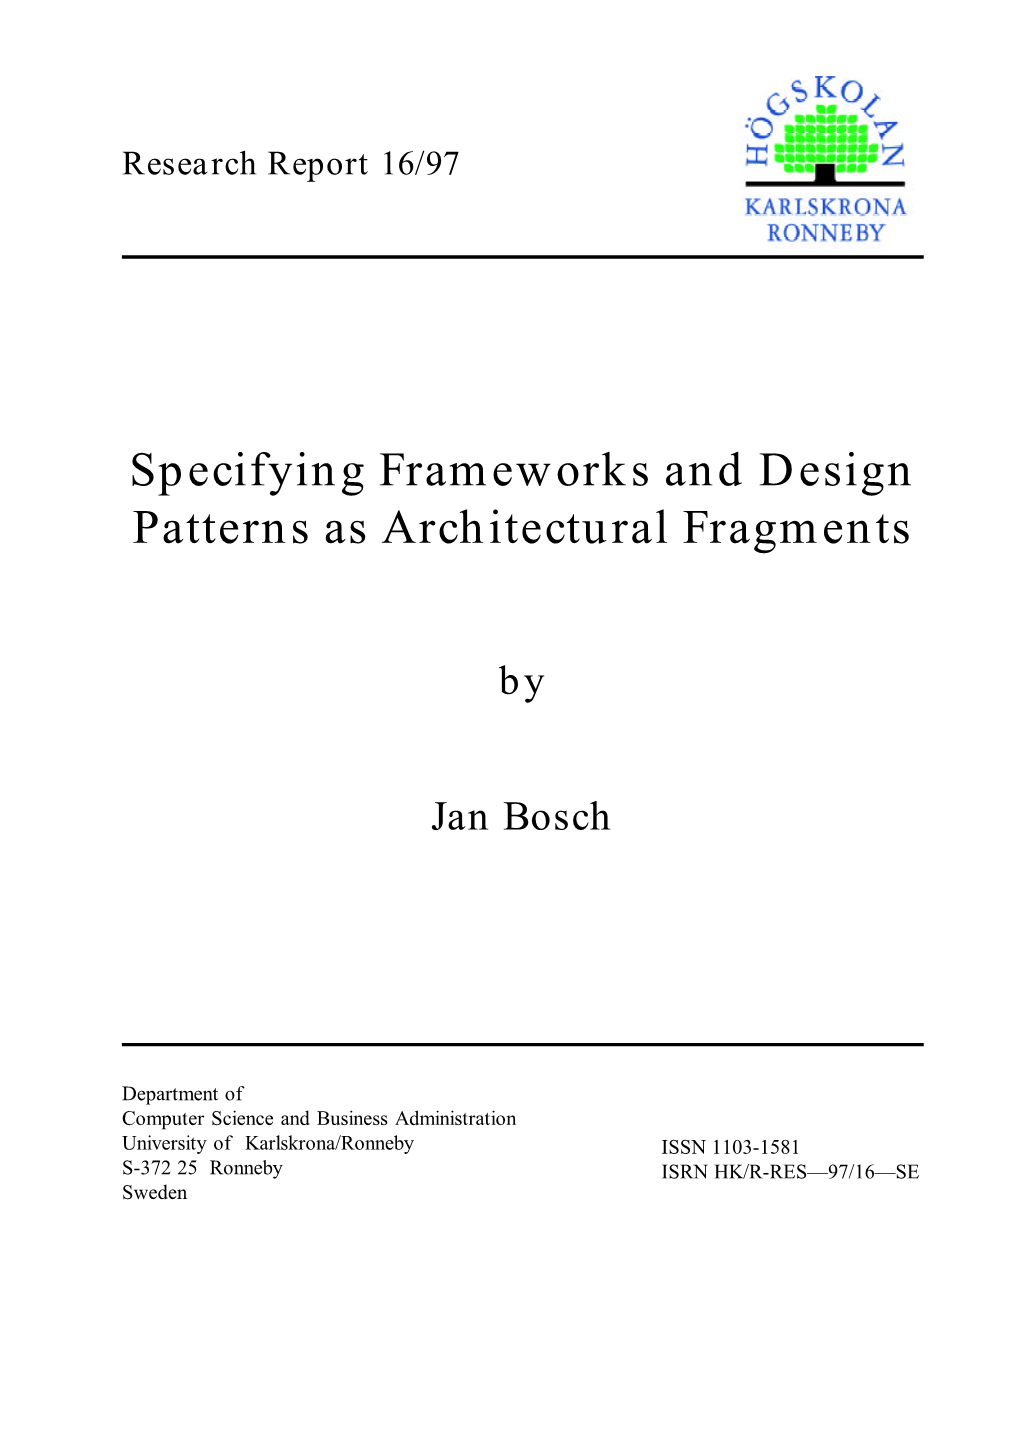 Specifying Frameworks and Design Patterns As Architectural Fragments